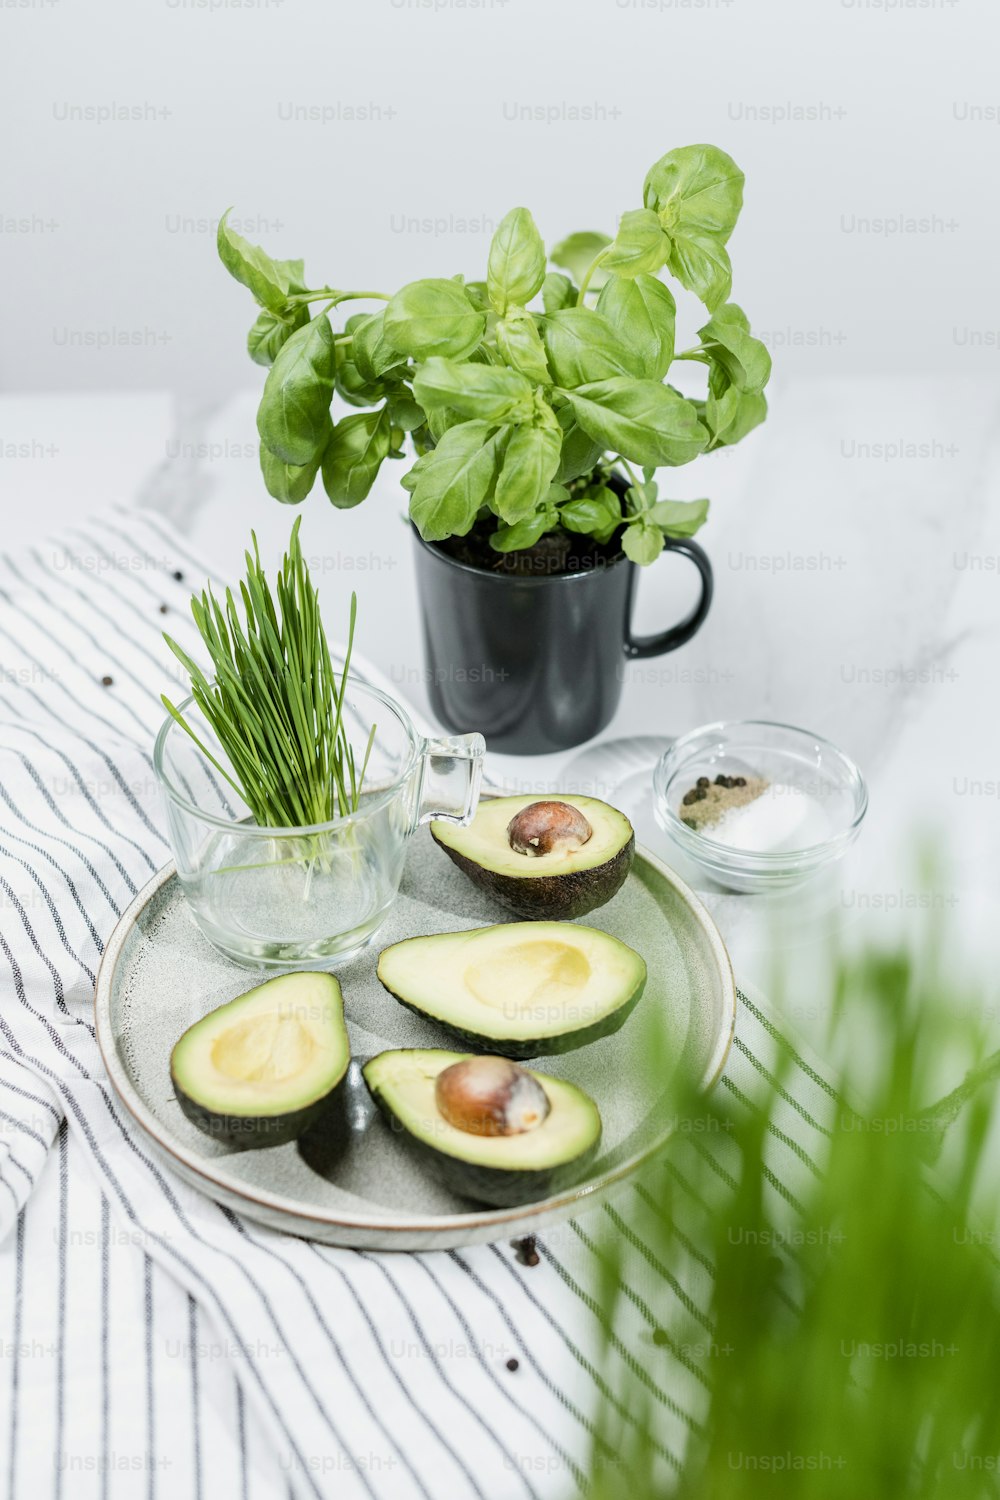 an avocado cut in half on a plate next to a potted plant